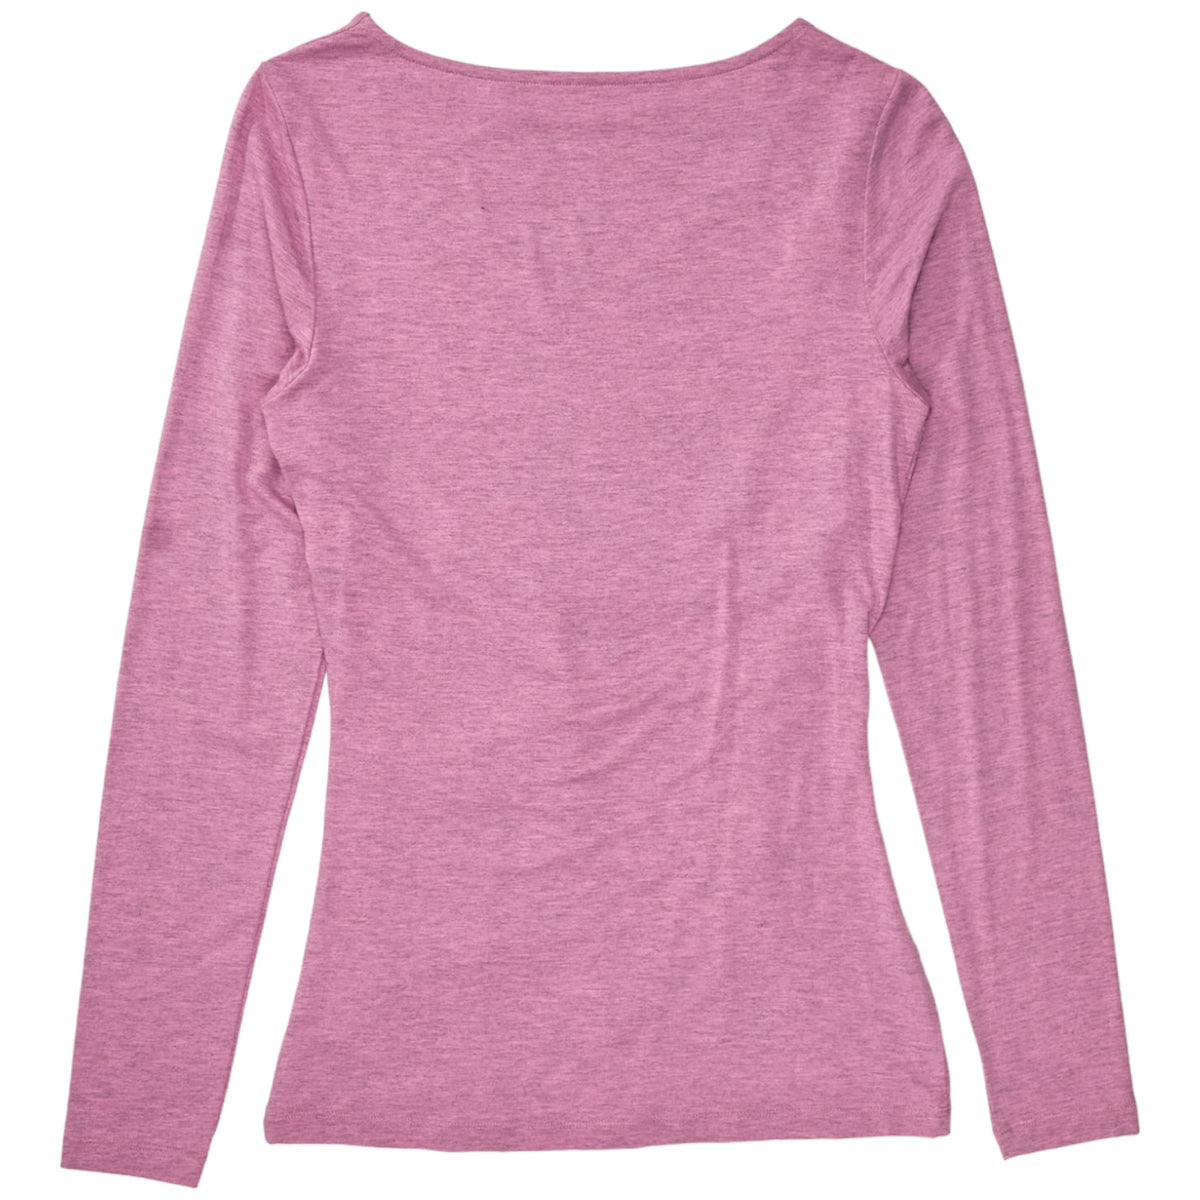 NRBY Pink/Grey Ruched Top